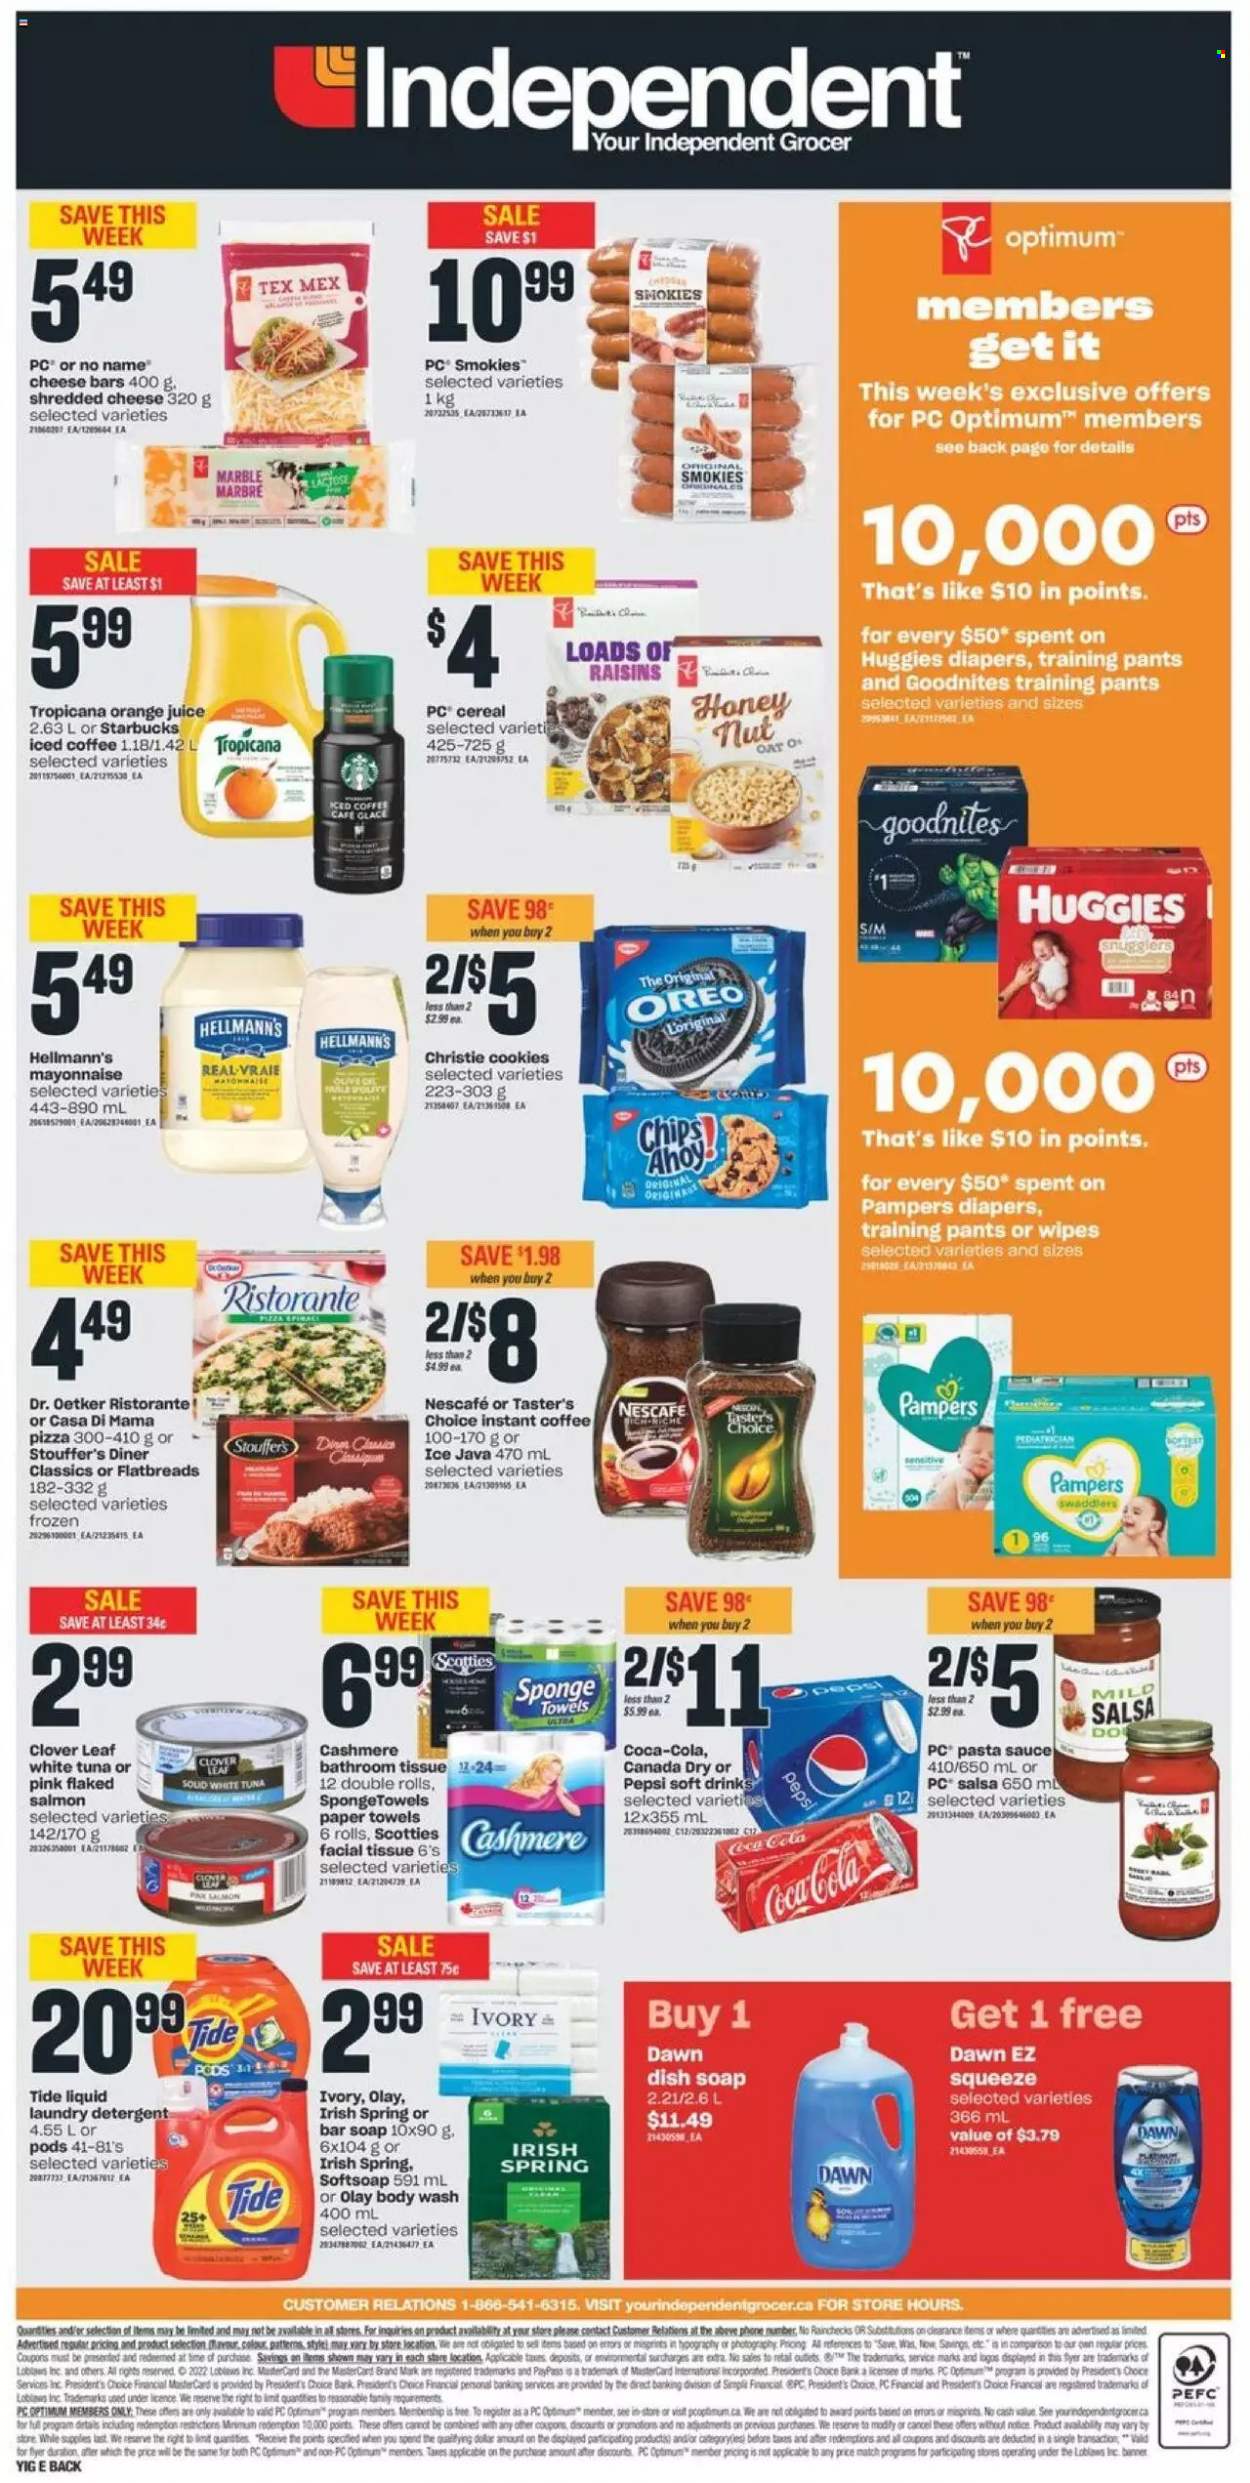 thumbnail - Independent Flyer - May 19, 2022 - May 25, 2022 - Sales products - salmon, tuna, pizza, pasta sauce, sauce, shredded cheese, Dr. Oetker, Président, Clover, mayonnaise, Hellmann’s, Stouffer's, cookies, oats, cereals, salsa, dried fruit, Canada Dry, Coca-Cola, Pepsi, orange juice, juice, soft drink, iced coffee, instant coffee, Starbucks, wipes, pants, nappies, baby pants, bath tissue, kitchen towels, paper towels, Tide, laundry detergent, body wash, Softsoap, soap bar, soap, Olay, sponge, Optimum, detergent, raisins, Huggies, Pampers, Oreo, Nescafé. Page 2.